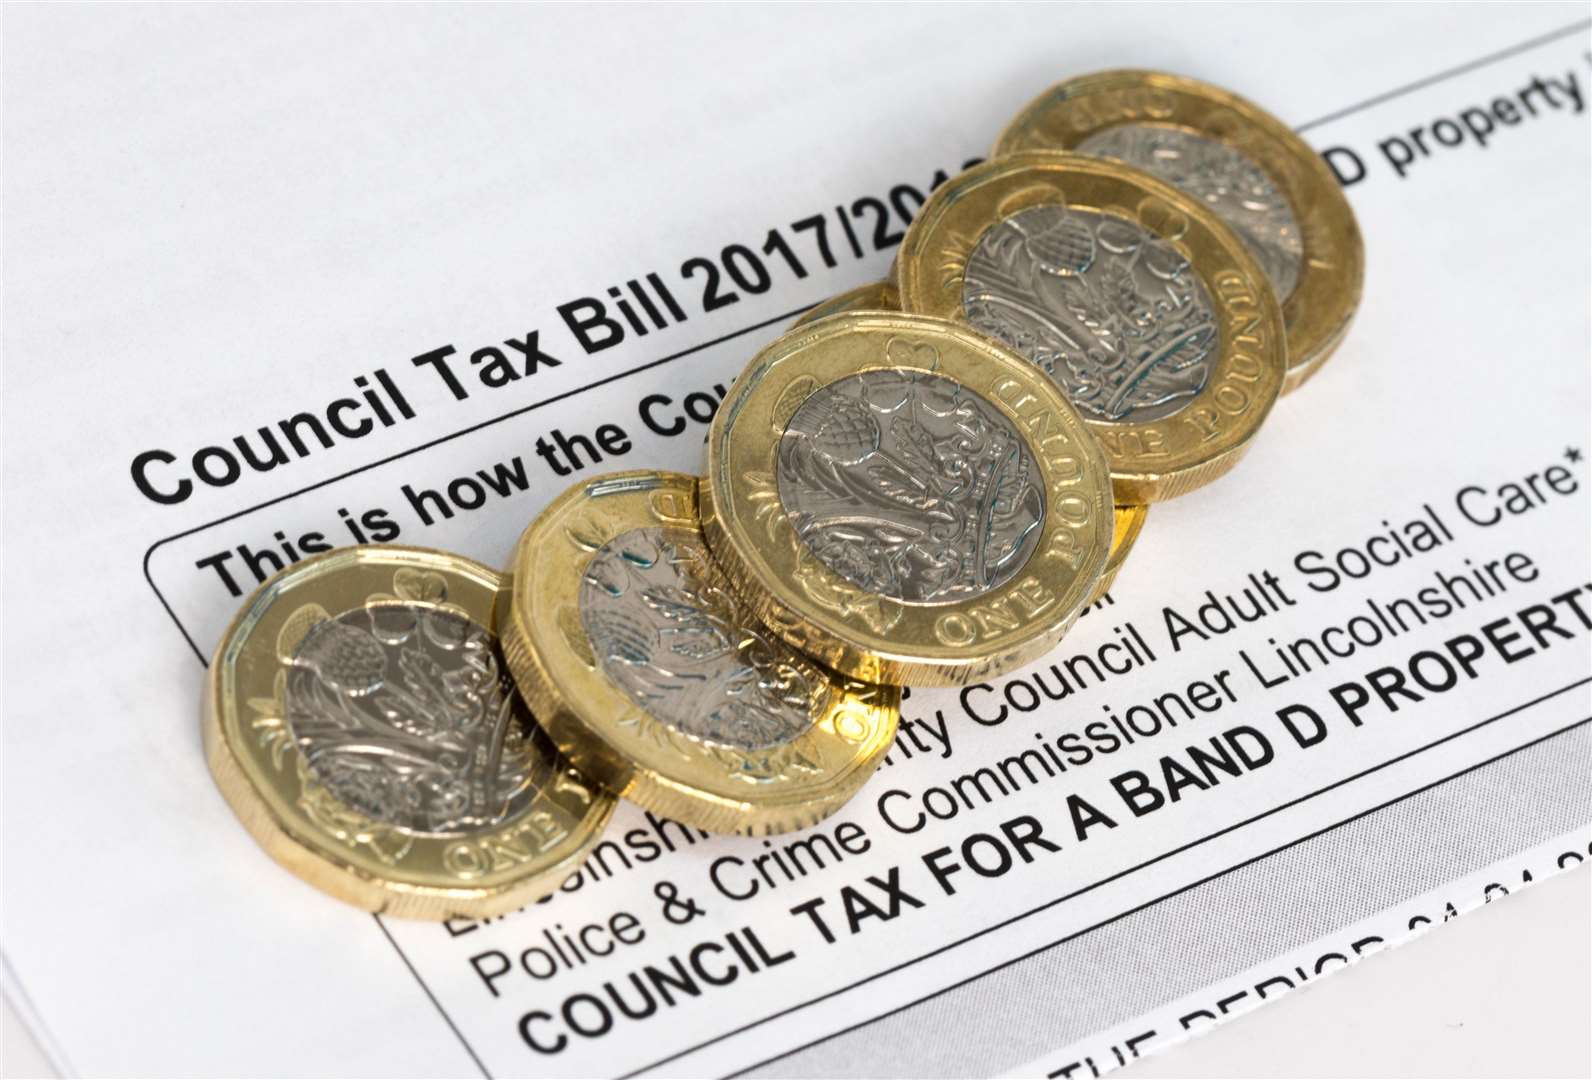 Kent County Council's precept is set to rise by 2.99%